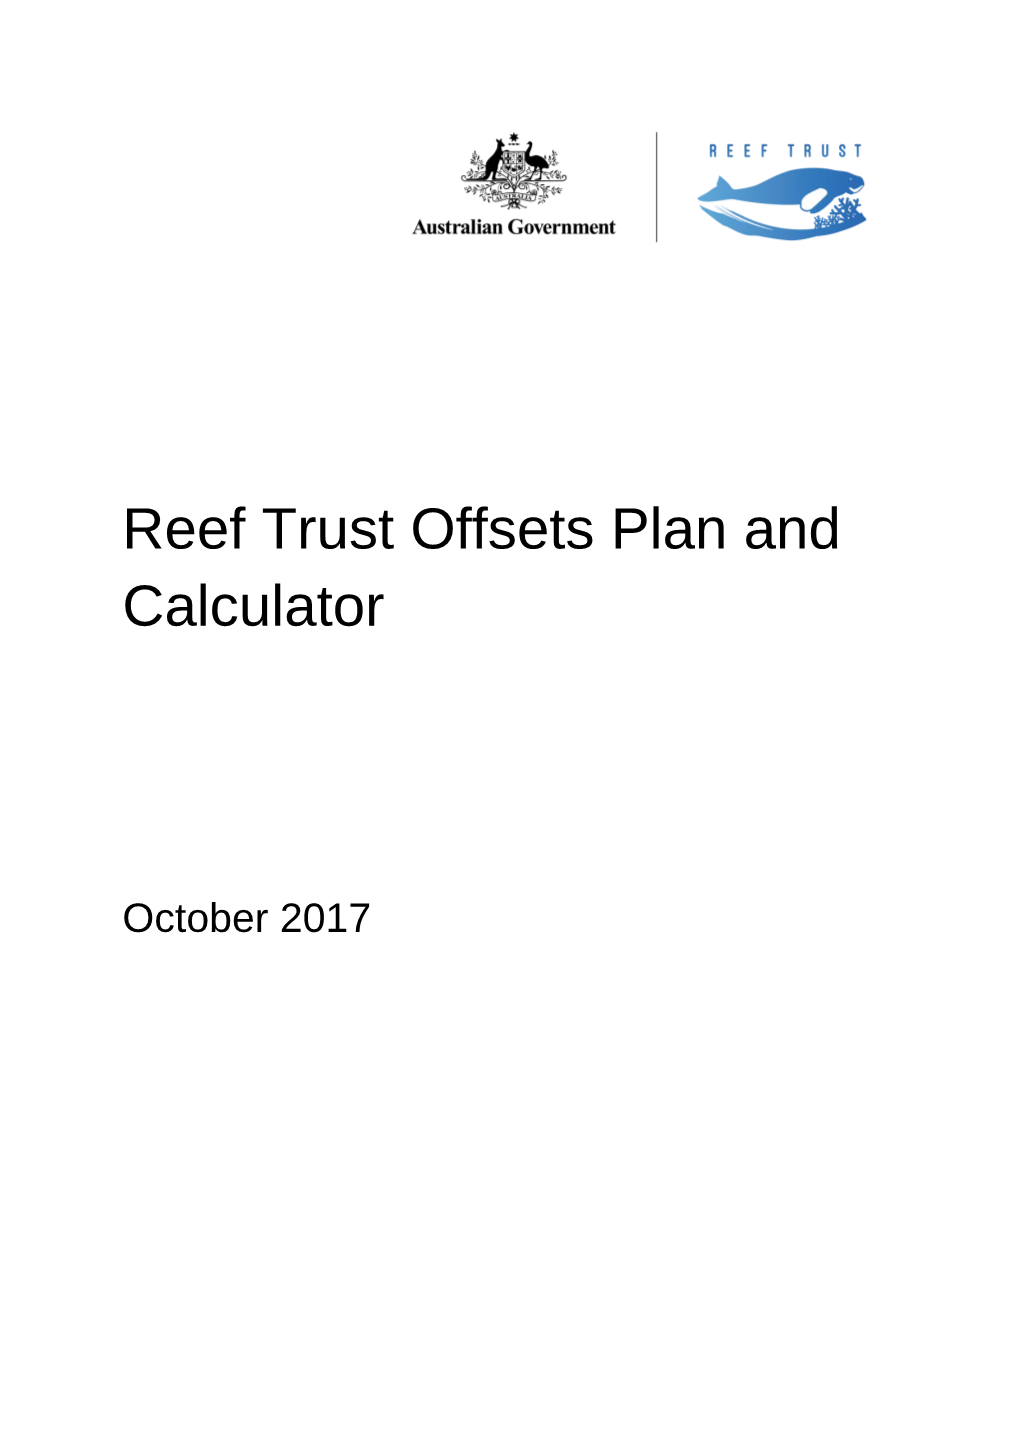 Reef Trust Offsets Plan and Calculator